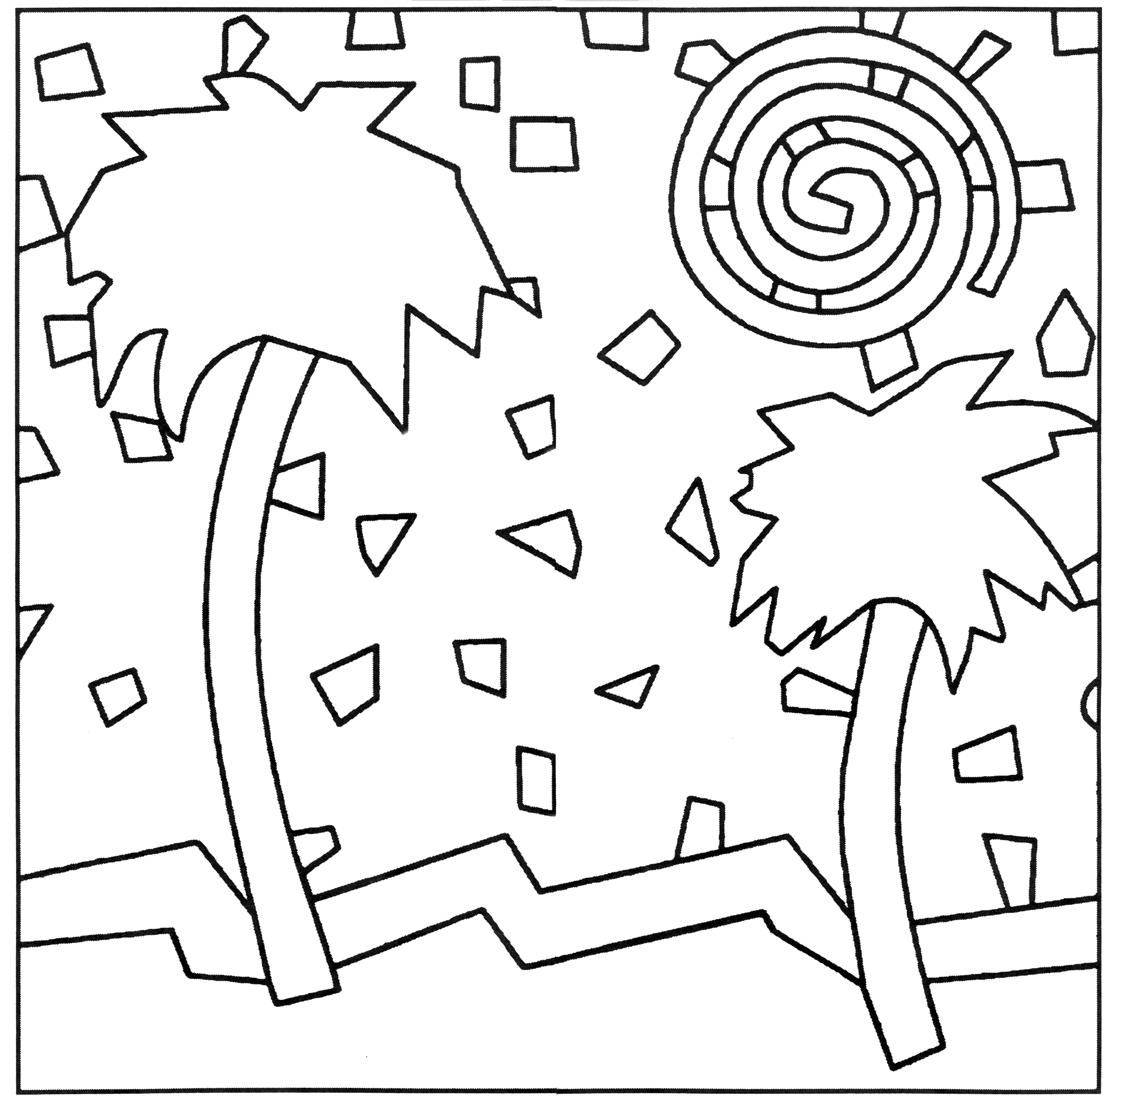 Pattern Simple Mosaic Coloring Pages #7145 Simple Mosaic Coloring ...